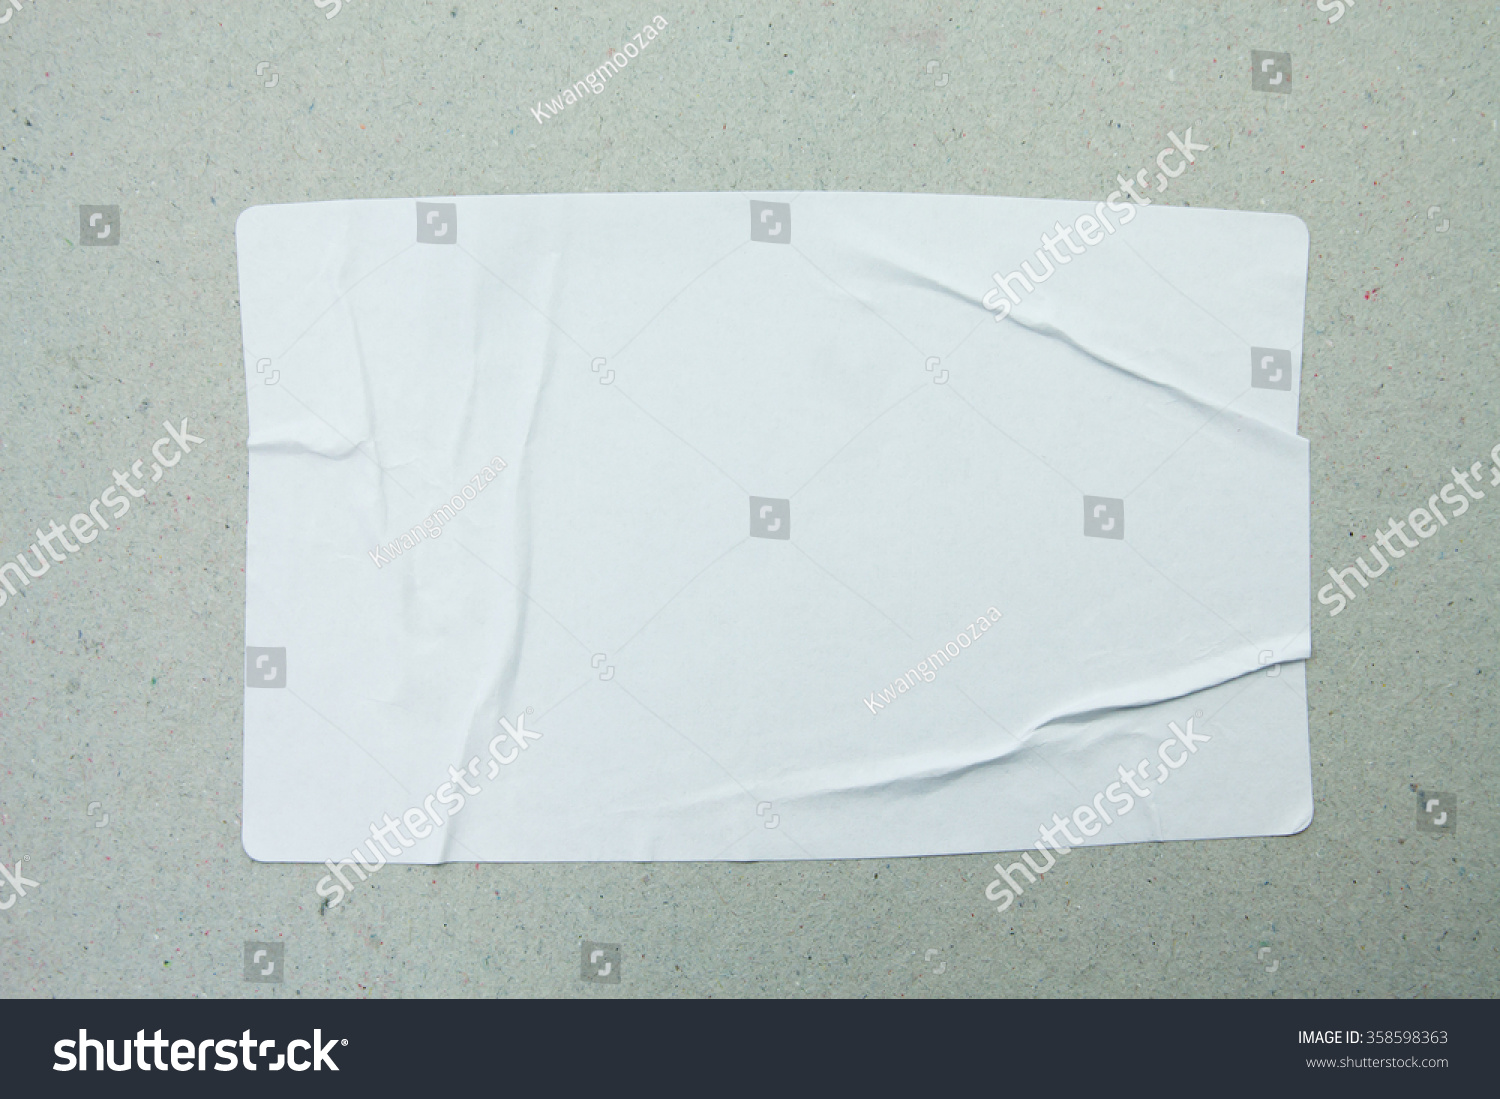 Stickers label close up on gray paper background #358598363